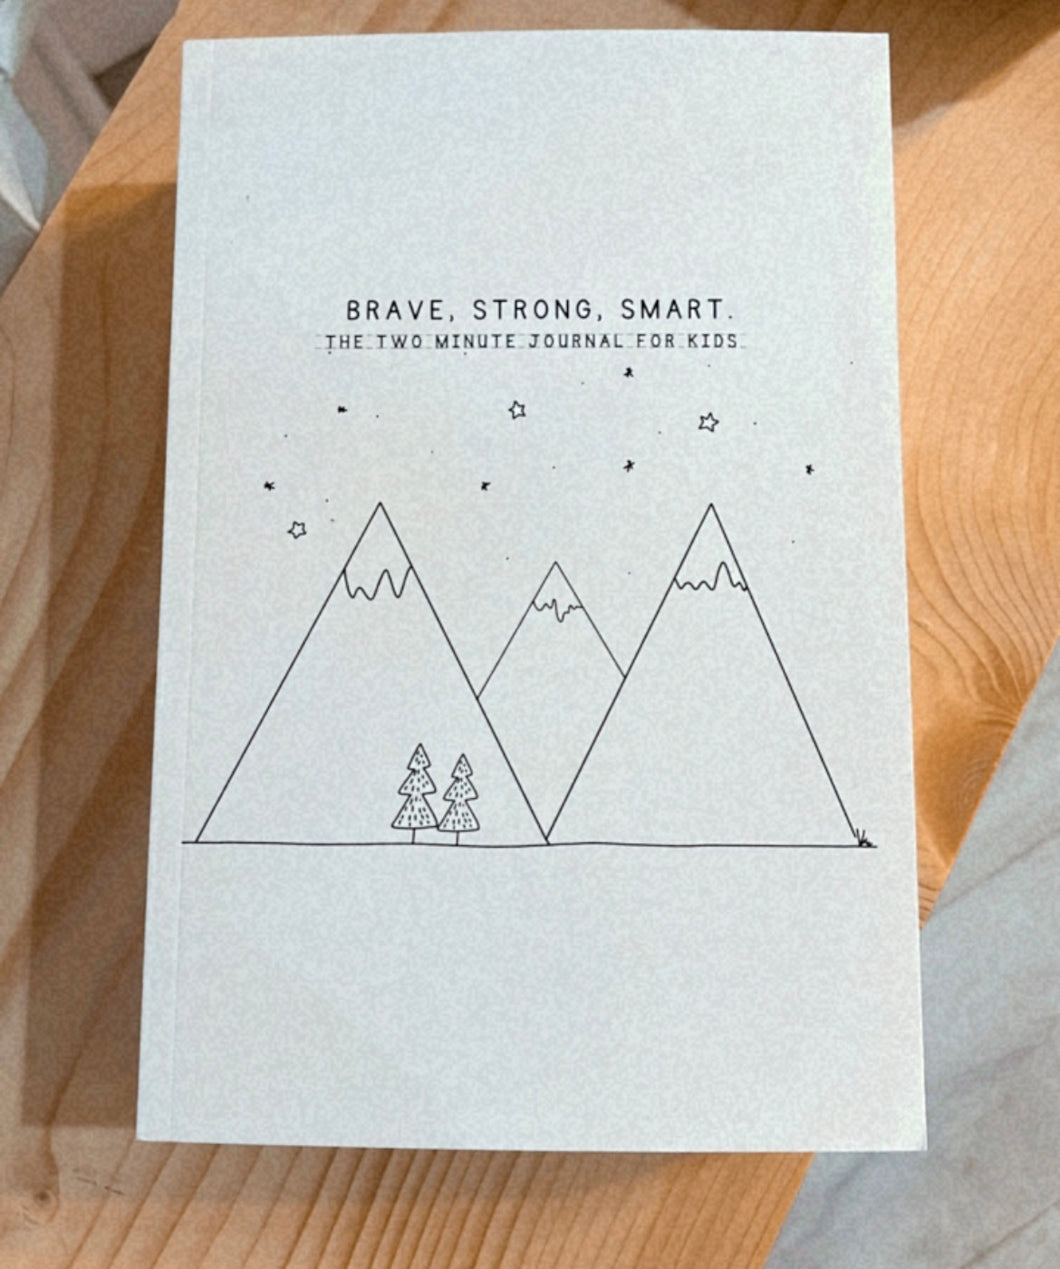 Brave. Strong. Smart. Journal